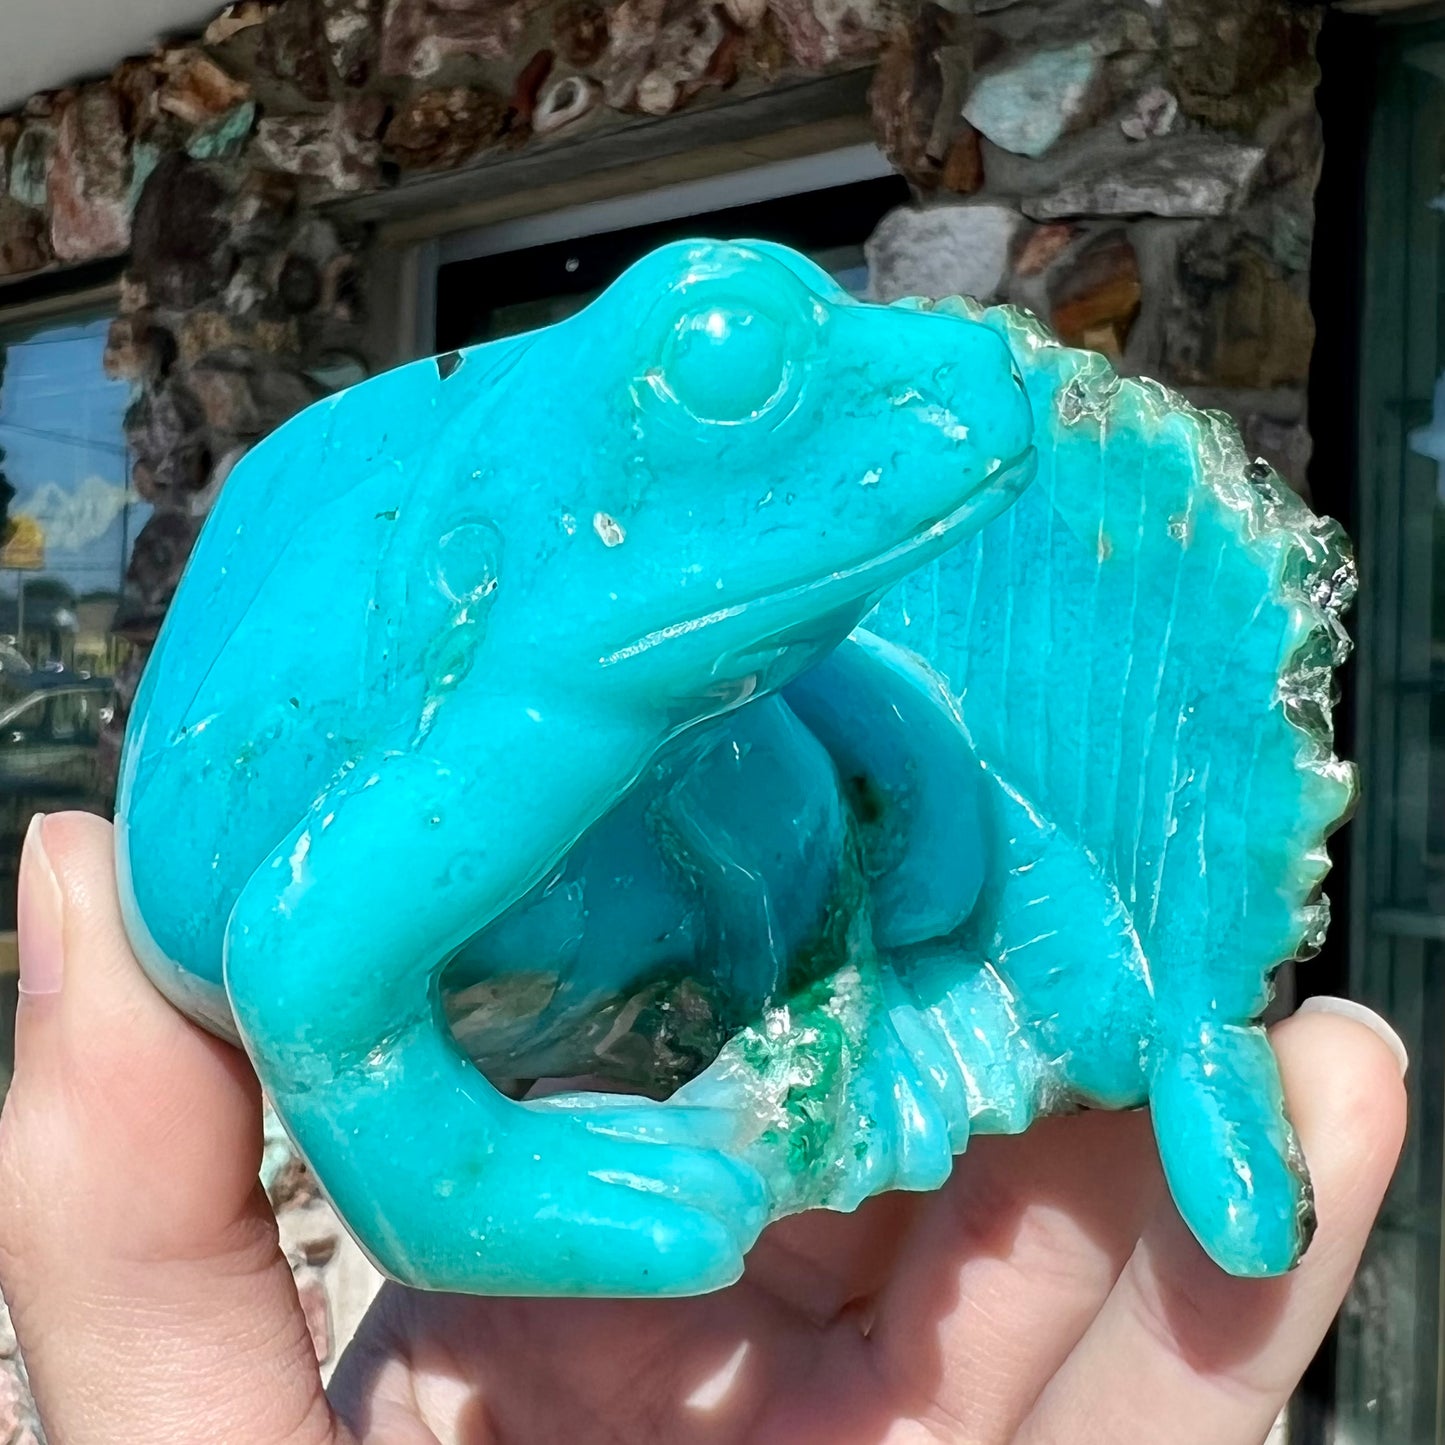 A stone frog peeking from behind a leaf carved from gem silica grade chrysocolla by artist, Ron Stevens.